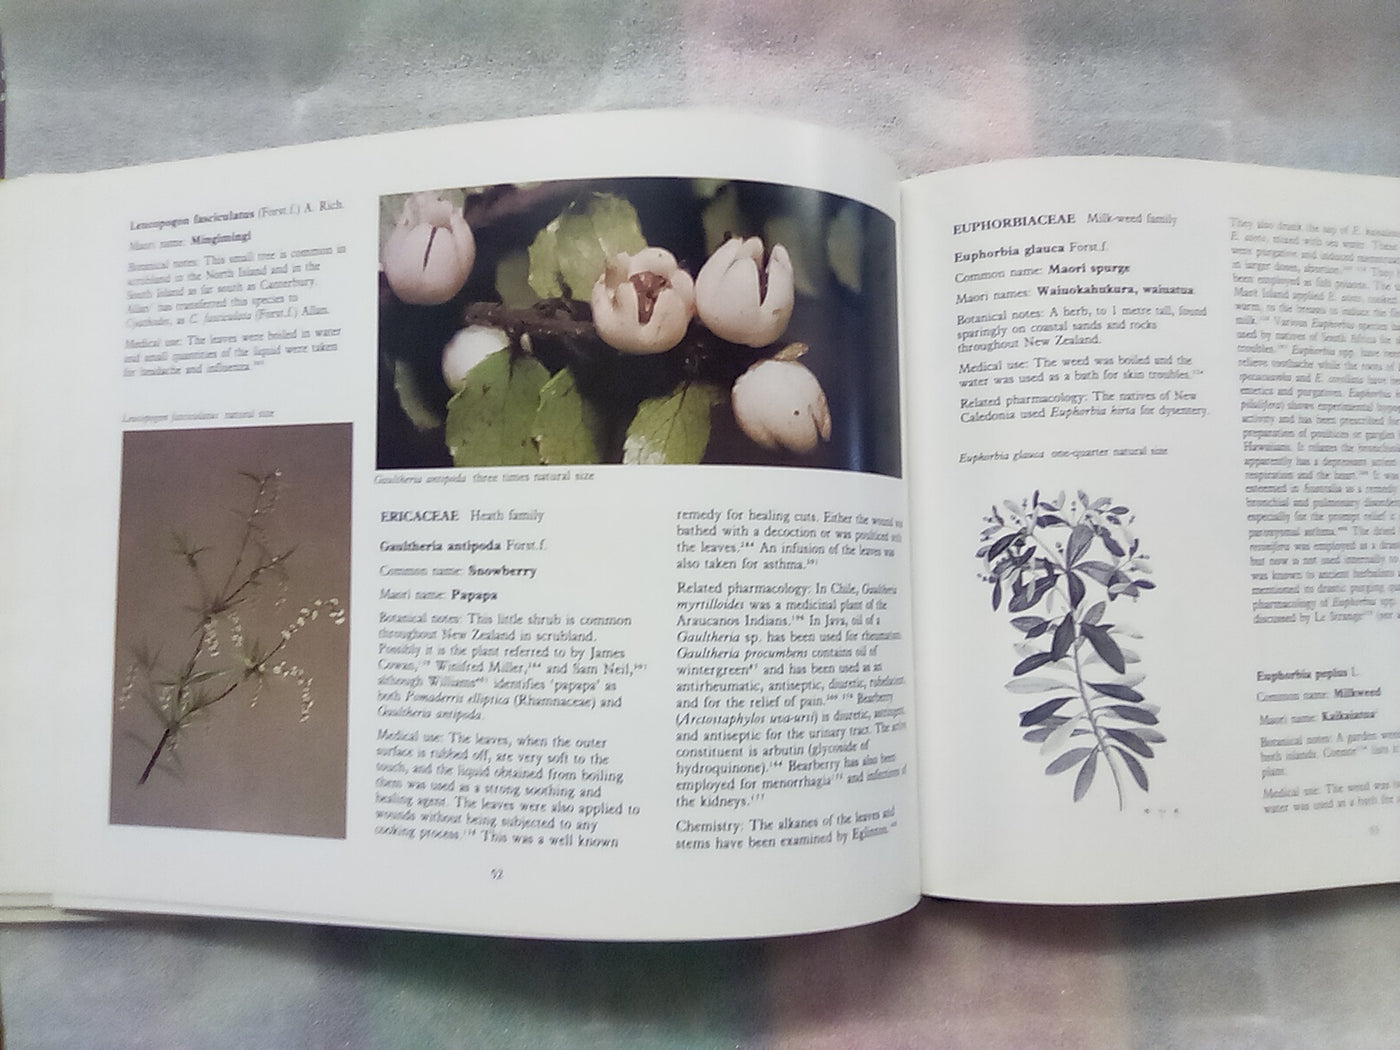 New Zealand Medicinal Plants (1981) by Brooker, Cambie, & Cooper